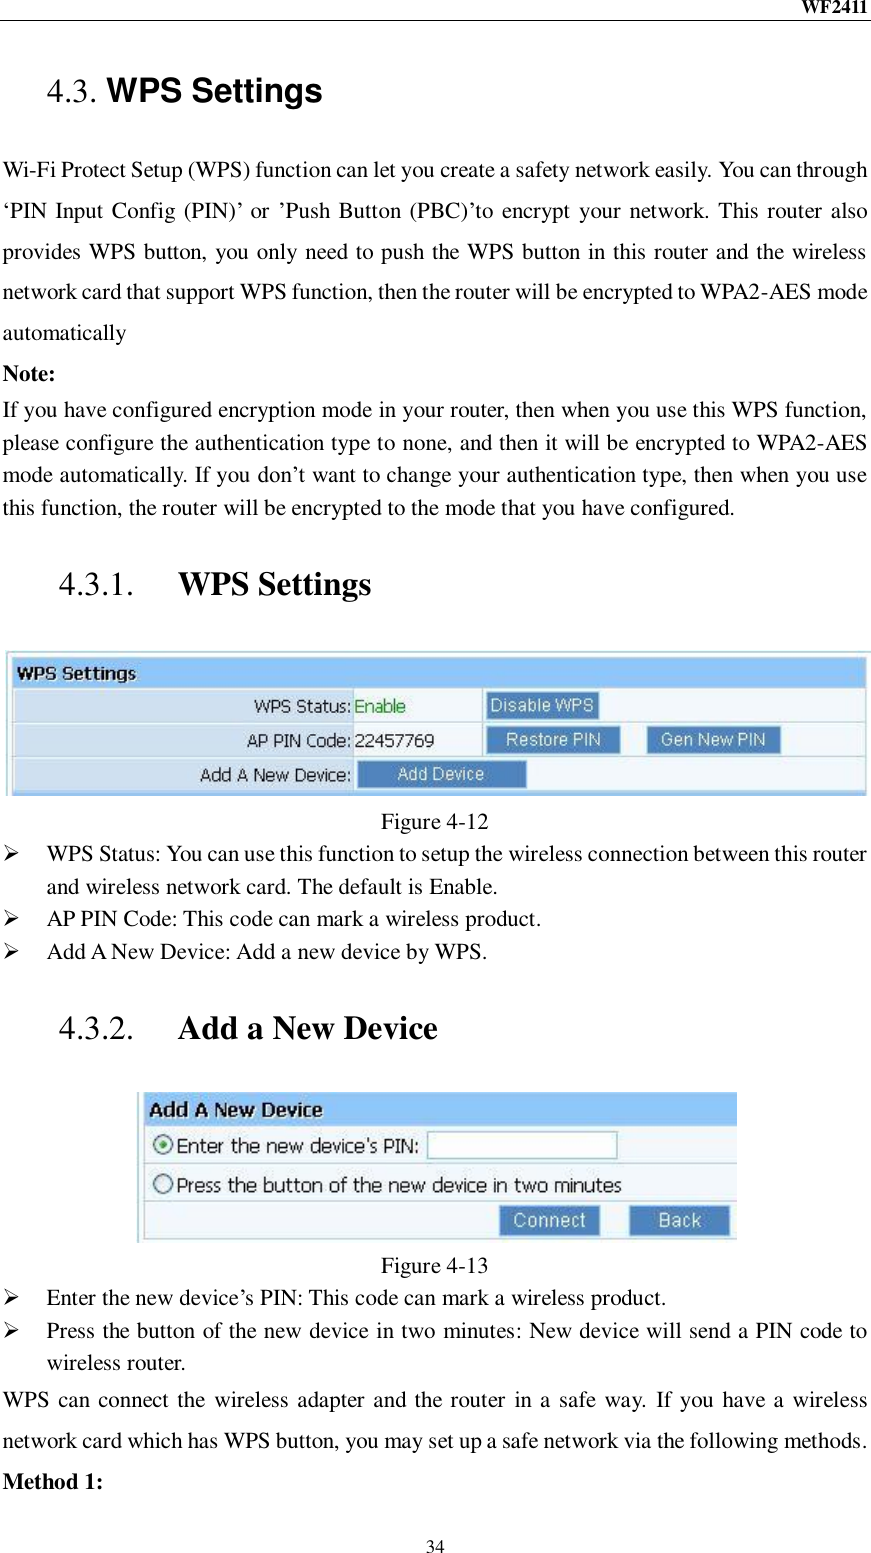 WF2411  34 4.3. WPS Settings Wi-Fi Protect Setup (WPS) function can let you create a safety network easily. You can through „PIN Input Config (PIN)‟ or ‟Push Button (PBC)‟to encrypt your network. This router also provides WPS button, you only need to push the WPS button in this router and the wireless network card that support WPS function, then the router will be encrypted to WPA2-AES mode automatically Note: If you have configured encryption mode in your router, then when you use this WPS function, please configure the authentication type to none, and then it will be encrypted to WPA2-AES mode automatically. If you don‟t want to change your authentication type, then when you use this function, the router will be encrypted to the mode that you have configured. 4.3.1. WPS Settings  Figure 4-12  WPS Status: You can use this function to setup the wireless connection between this router and wireless network card. The default is Enable.  AP PIN Code: This code can mark a wireless product.  Add A New Device: Add a new device by WPS. 4.3.2. Add a New Device  Figure 4-13  Enter the new device‟s PIN: This code can mark a wireless product.  Press the button of the new device in two minutes: New device will send a PIN code to wireless router. WPS can connect the wireless adapter and the router in a safe way.  If you have a wireless network card which has WPS button, you may set up a safe network via the following methods. Method 1: 